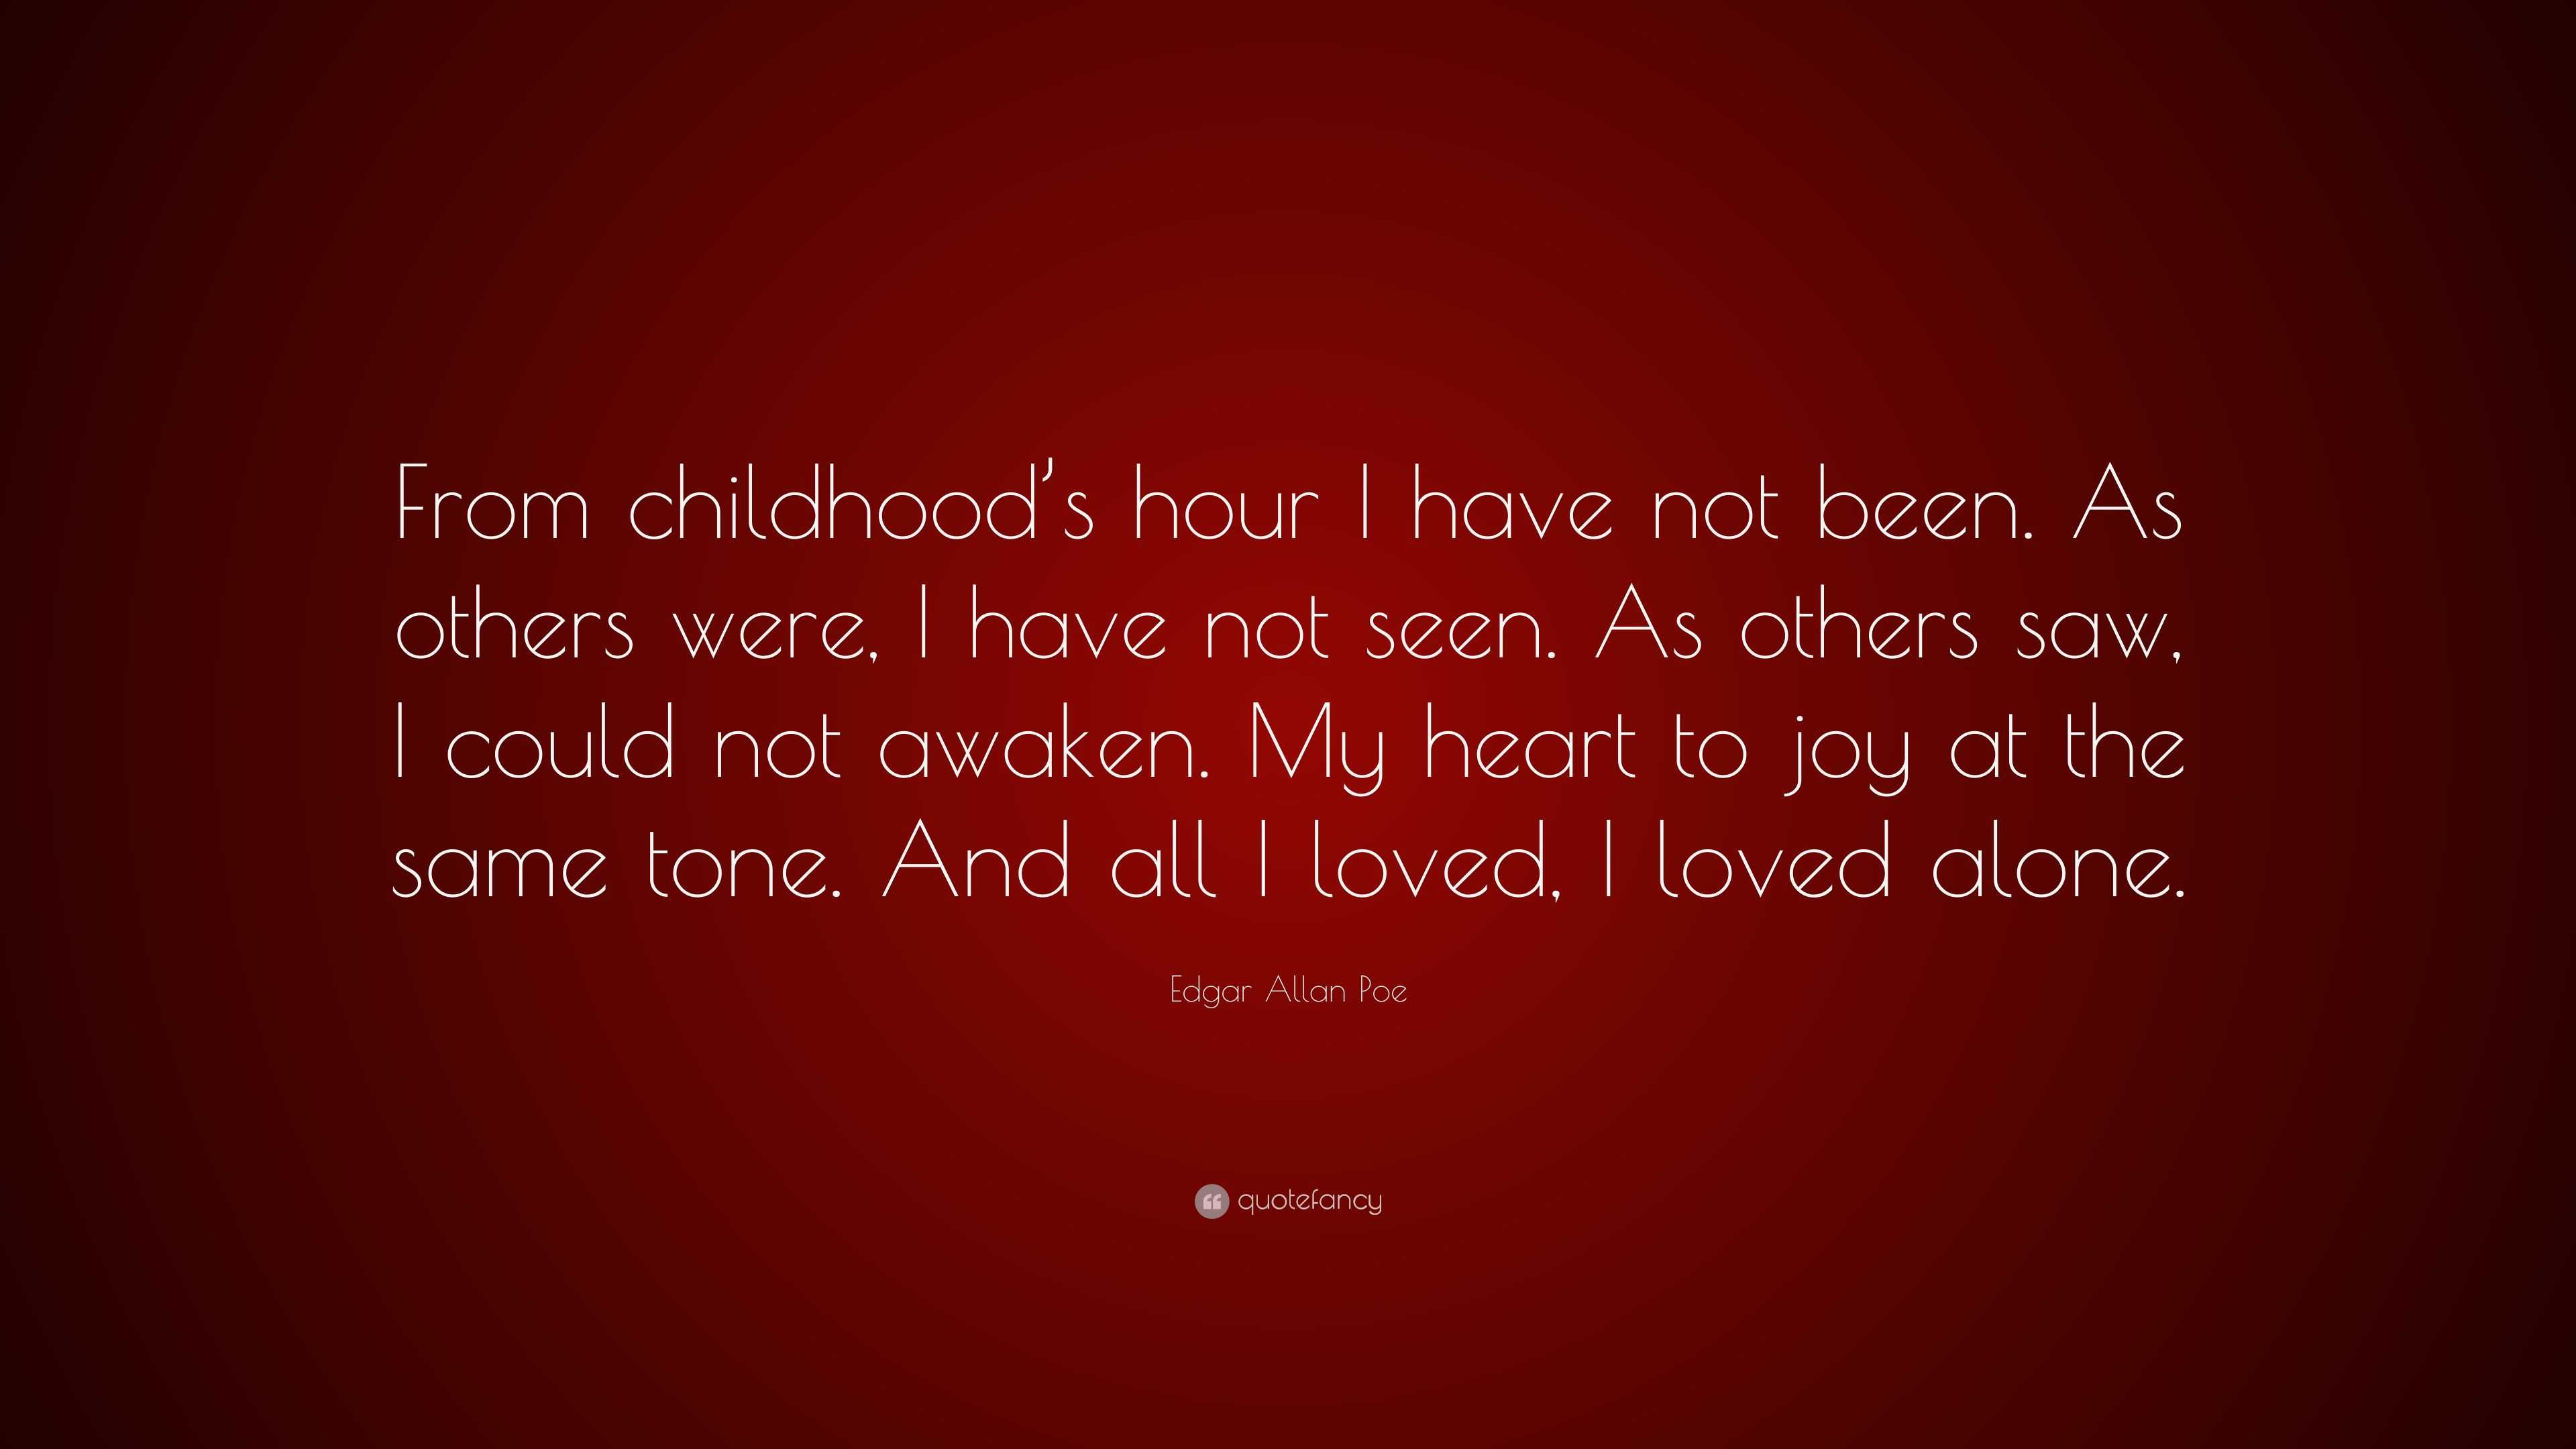 Edgar Allan Poe Quote: “From childhood’s hour I have not been. As ...